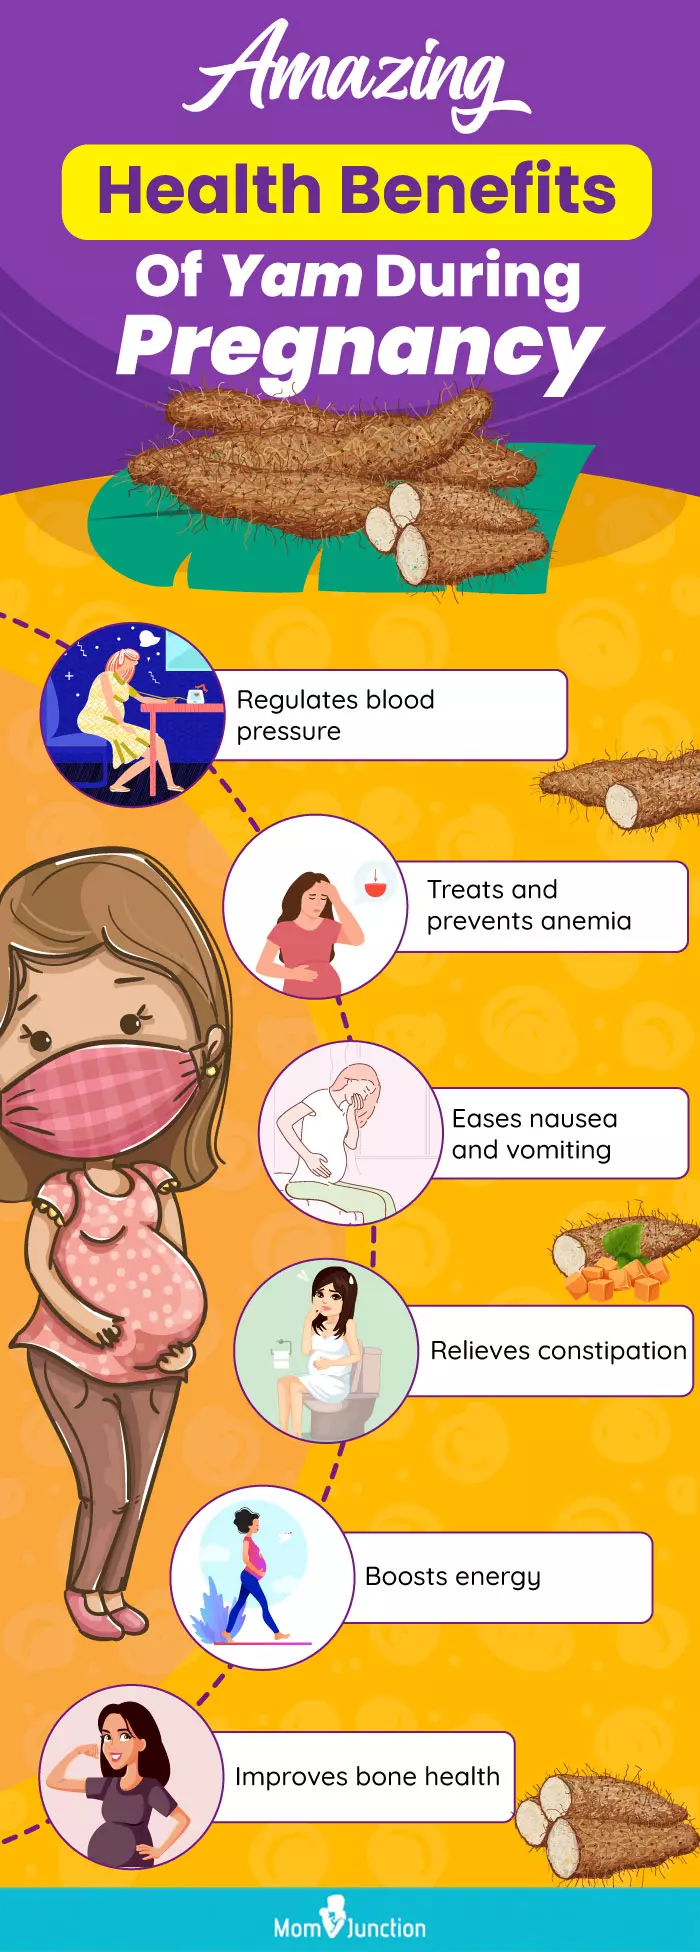 amazing health benefits of yam during pregnancy (infographic)